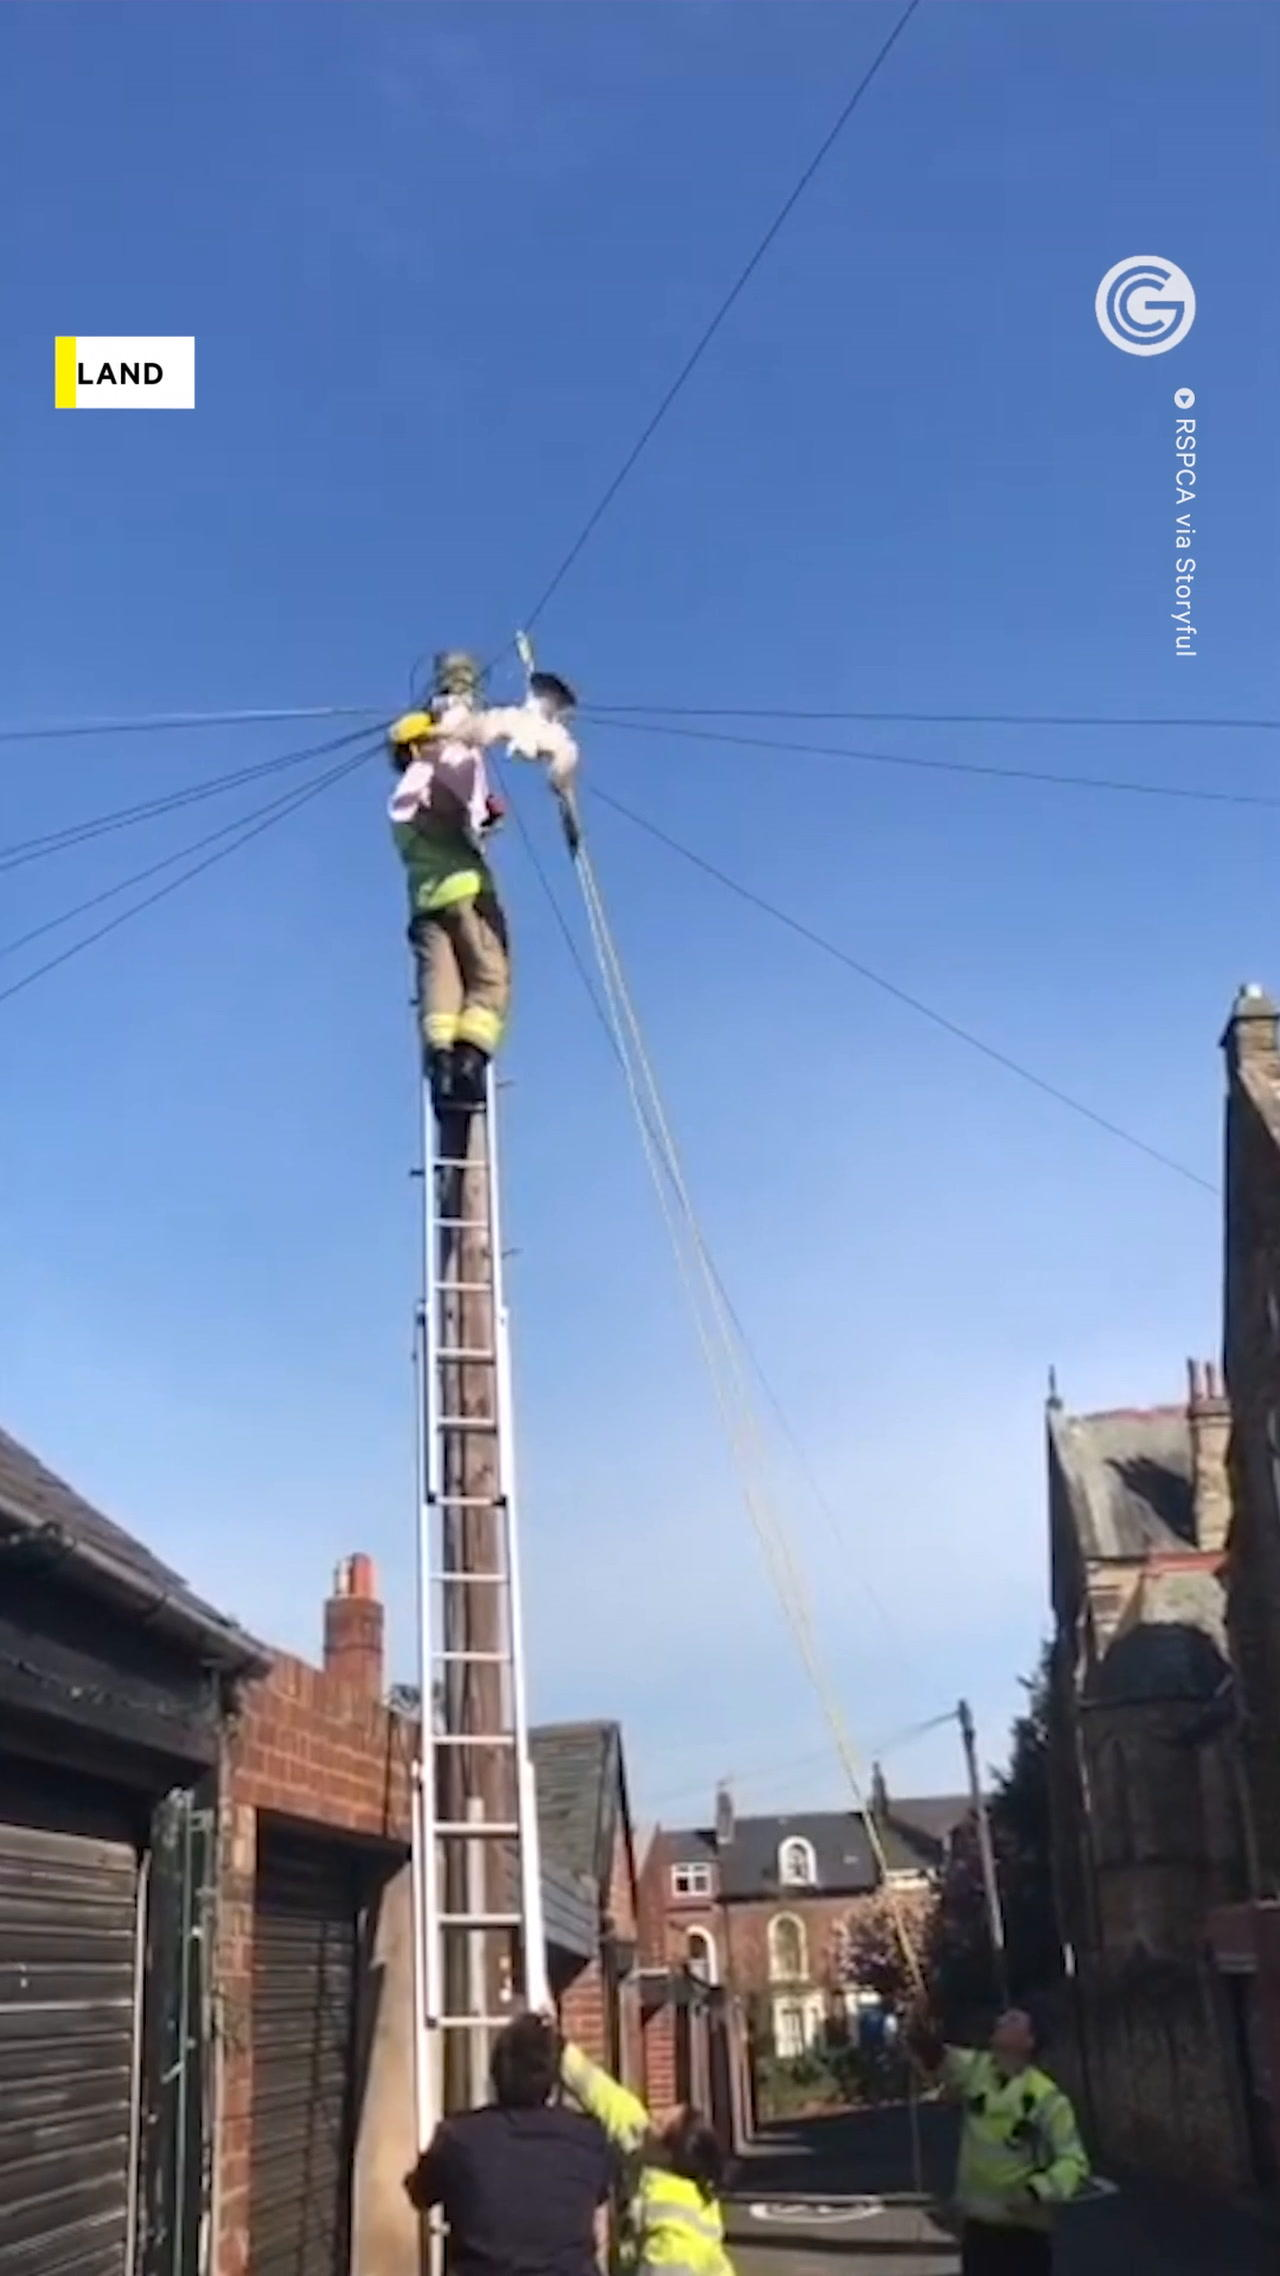 Rescuers Help Seagull Stuck on Power Line